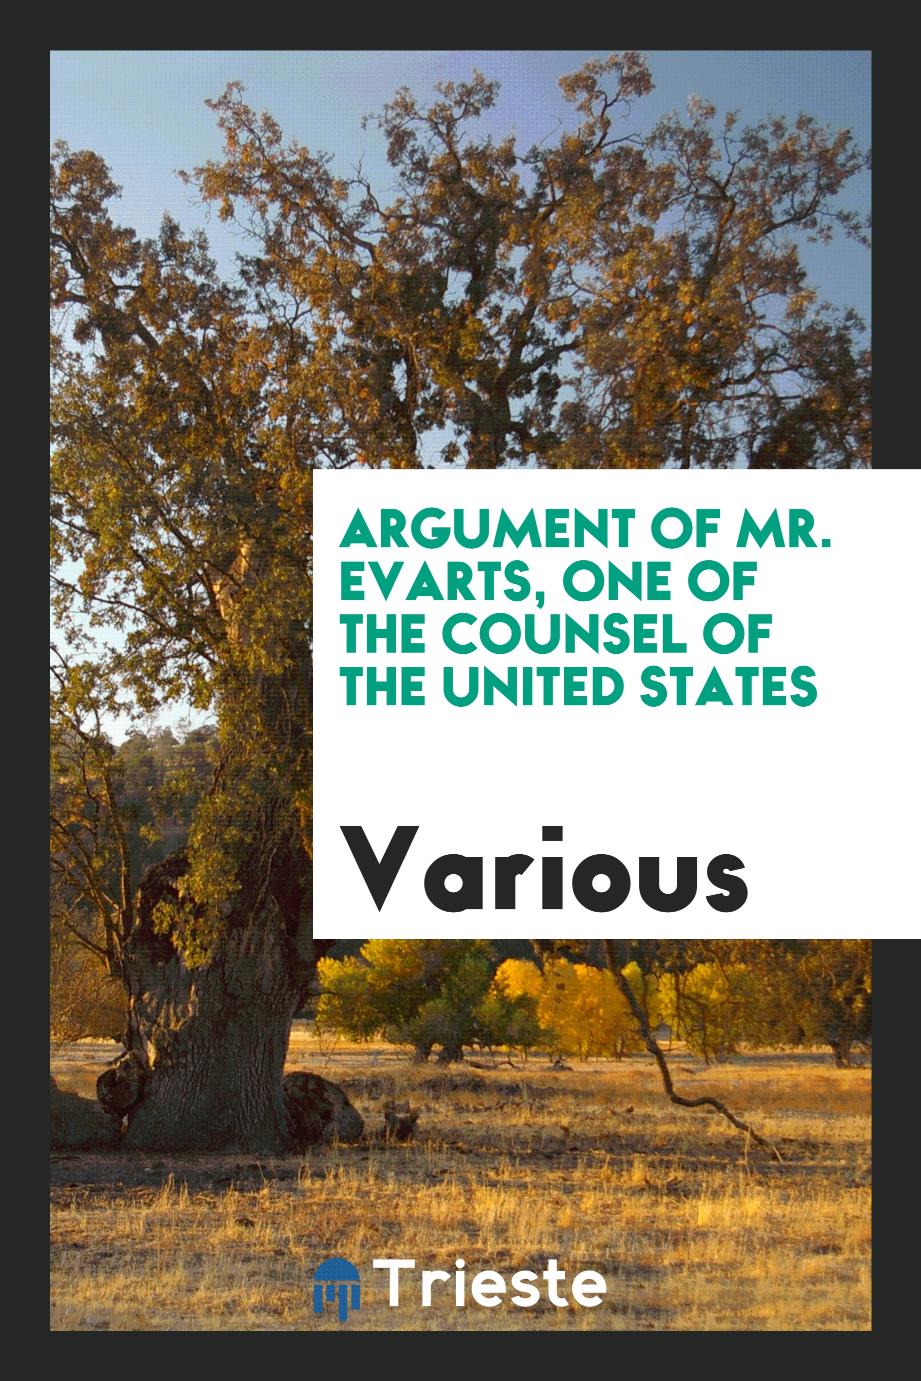 Argument of Mr. Evarts, One of the Counsel of the United States